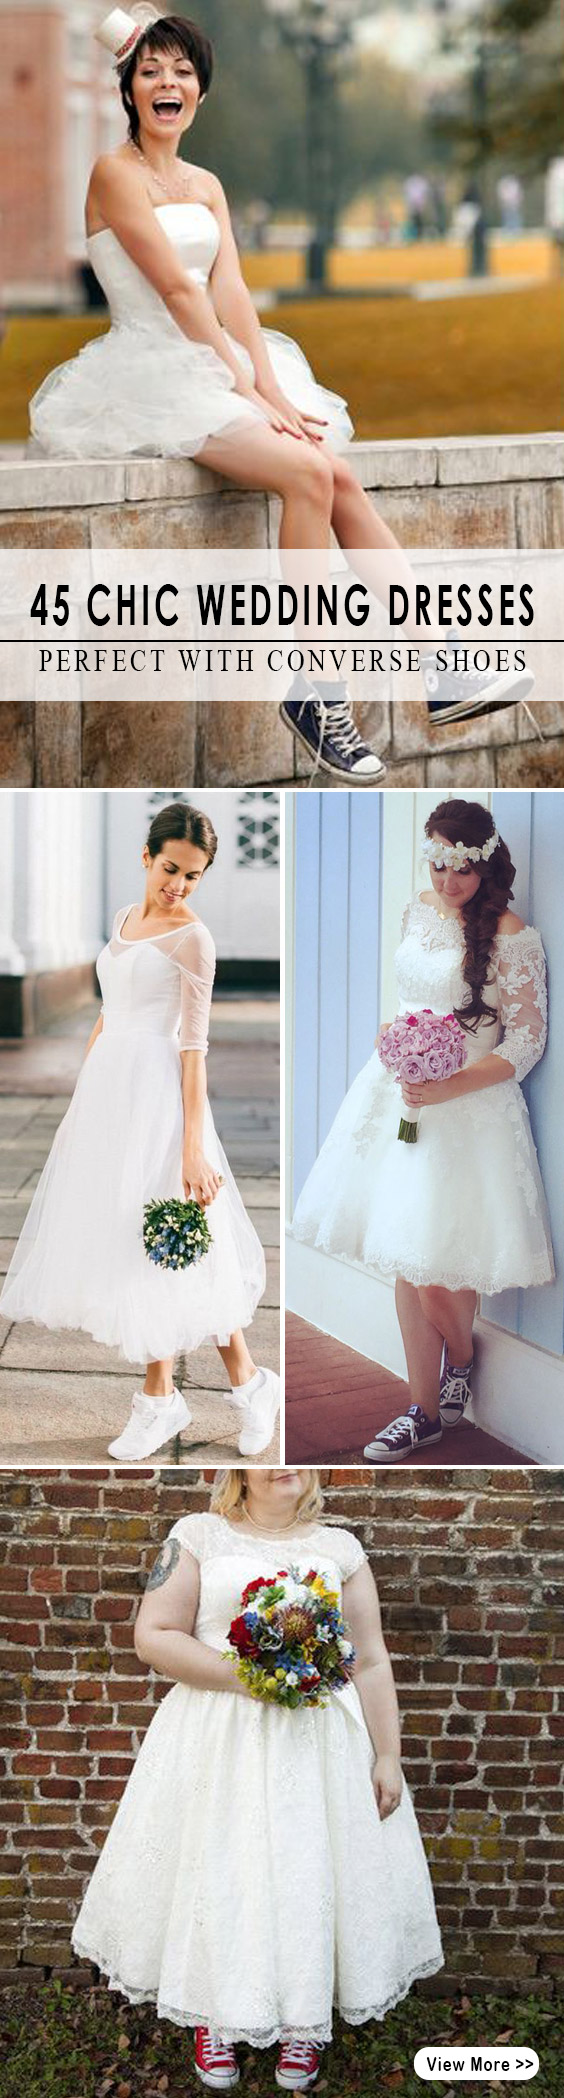 45 Chic Wedding Dress Perfect with Converse Shoes, Short, Tea Length or High Low Styles